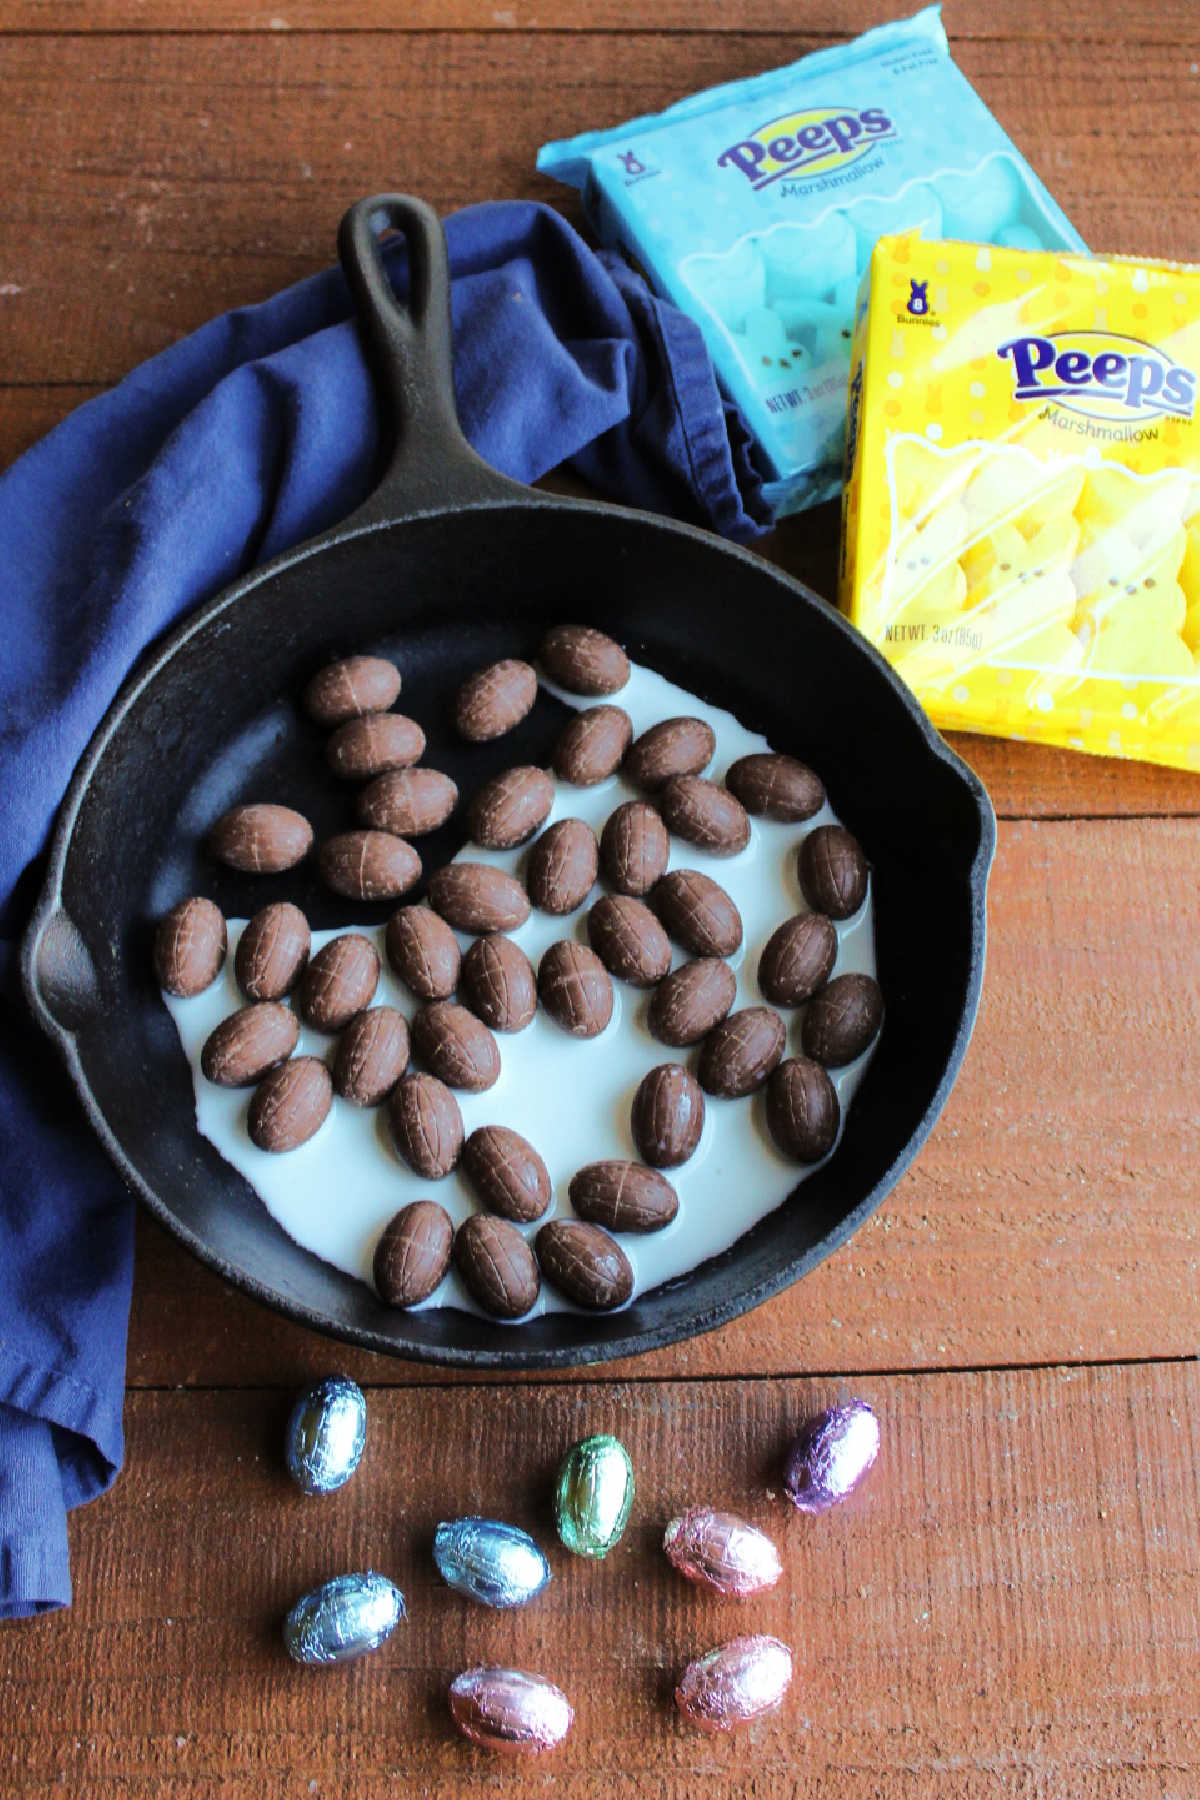 Small chocolate eggs in a pan with some milk next to a couple of packages of bunny shaped Peeps marshmallows.